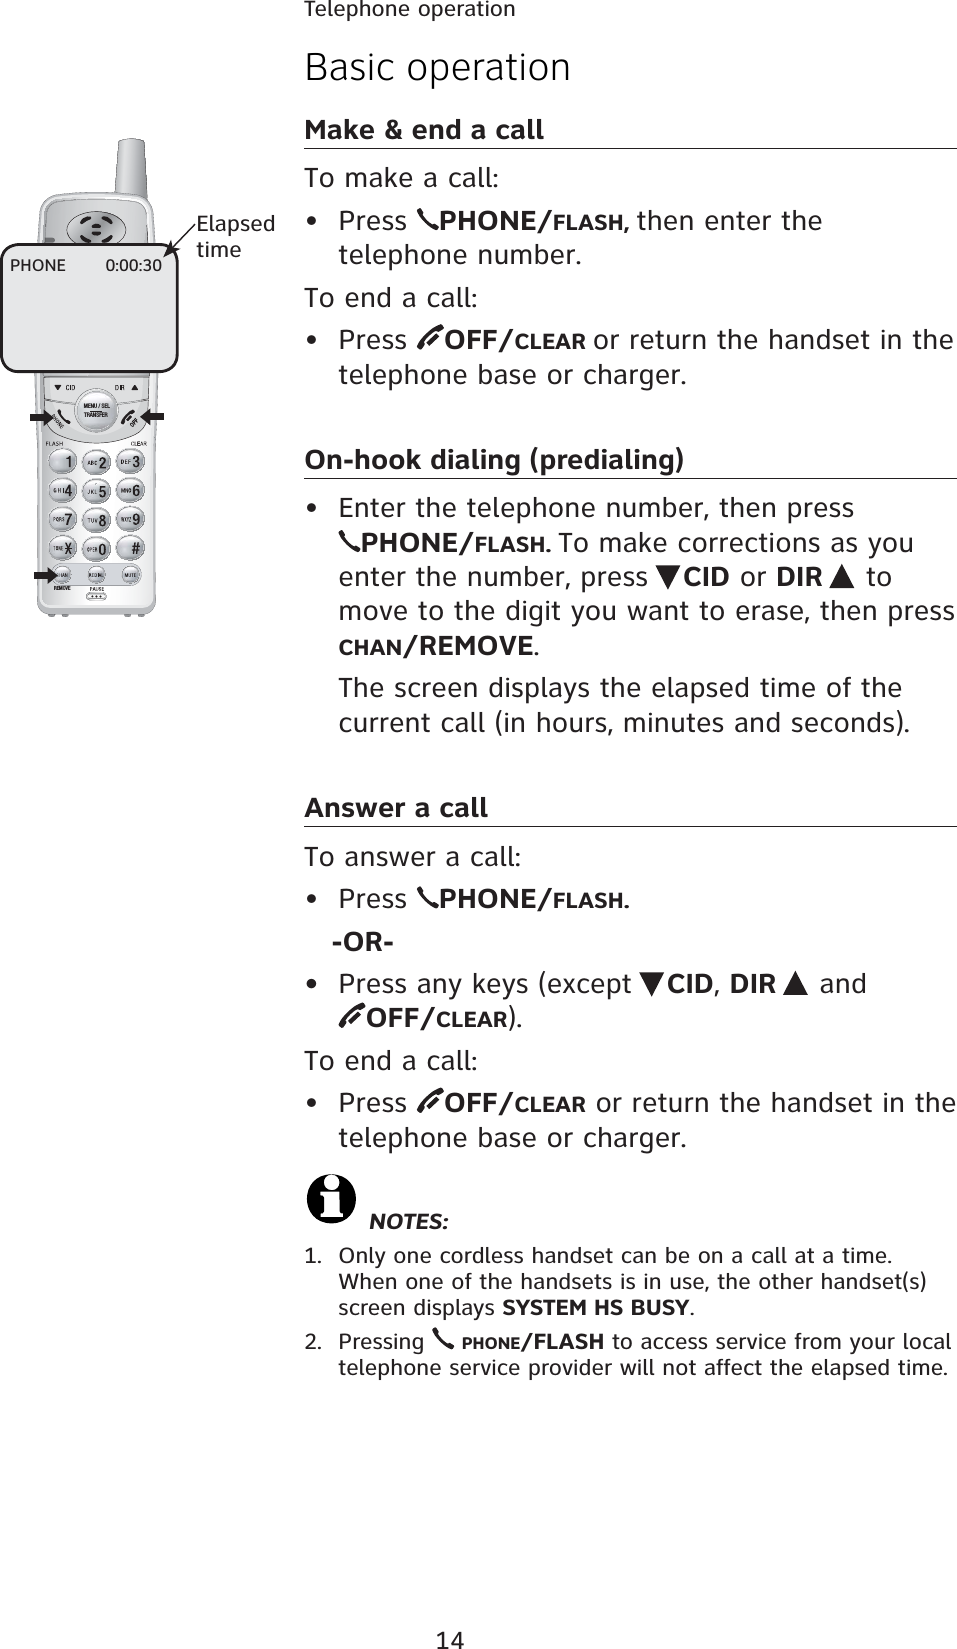 14REMOVEMENU / SELTRANSFERBasic operationMake &amp; end a callTo make a call:• Press  PHONE/FLASH, then enter the telephone number.To end a call:• Press  OFF/CLEAR or return the handset in the telephone base or charger.On-hook dialing (predialing)•  Enter the telephone number, then press PHONE/FLASH. To make corrections as you enter the number, press  CID or DIR   to move to the digit you want to erase, then press CHAN/REMOVE.  The screen displays the elapsed time of the current call (in hours, minutes and seconds).Answer a callTo answer a call:• Press  PHONE/FLASH.    -OR-•  Press any keys (except  CID, DIR   and  OFF/CLEAR).To end a call:• Press  OFF/CLEAR or return the handset in the telephone base or charger. NOTES:1.  Only one cordless handset can be on a call at a time. When one of the handsets is in use, the other handset(s) screen displays SYSTEM HS BUSY.2. Pressing   PHONE/FLASH to access service from your local telephone service provider will not affect the elapsed time.PHONE       0:00:30Elapsed timeTelephone operation